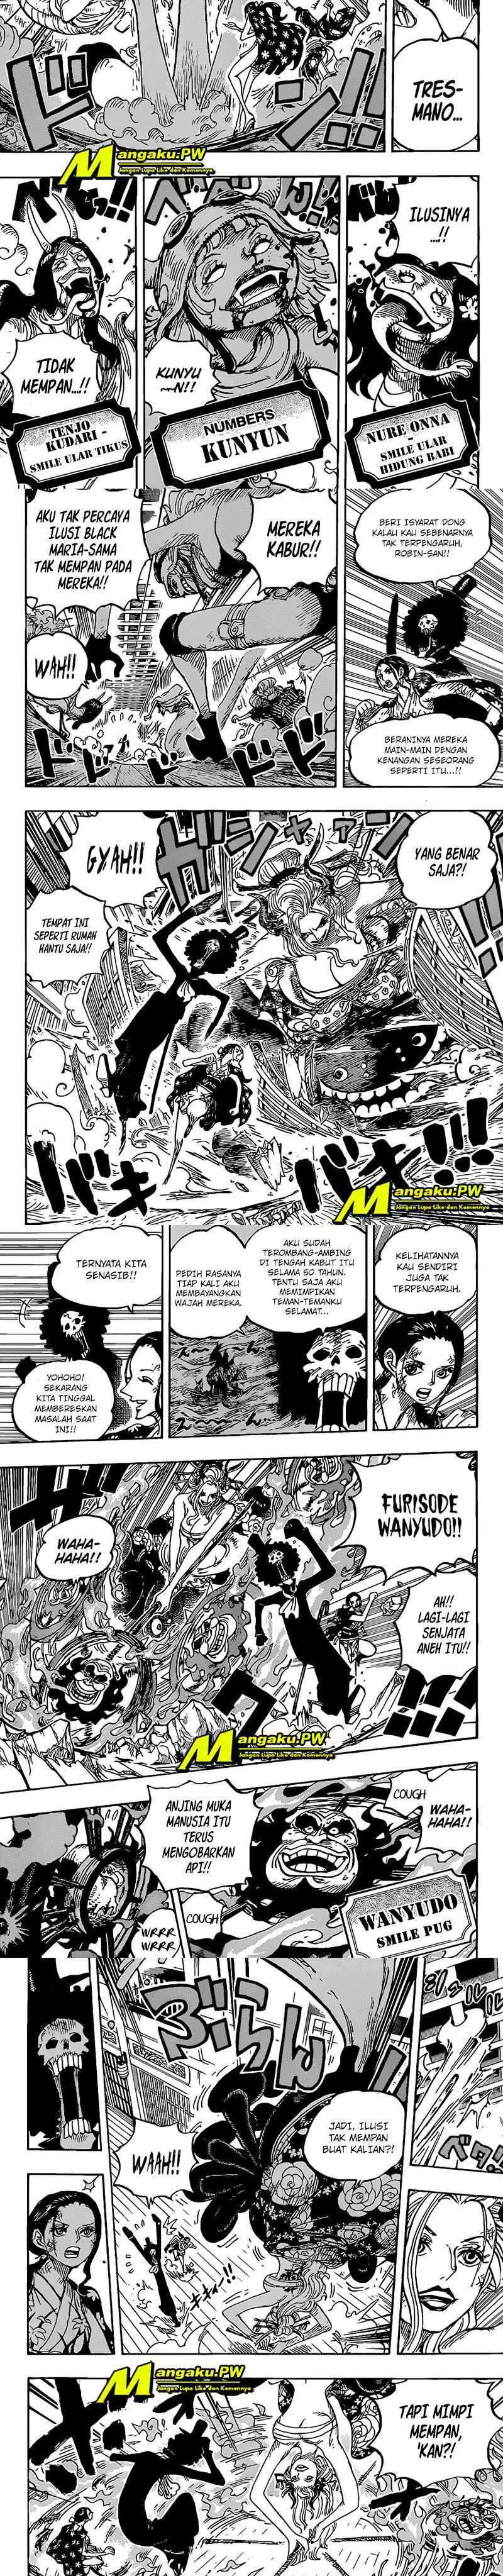 One Piece Chapter 1020 hq